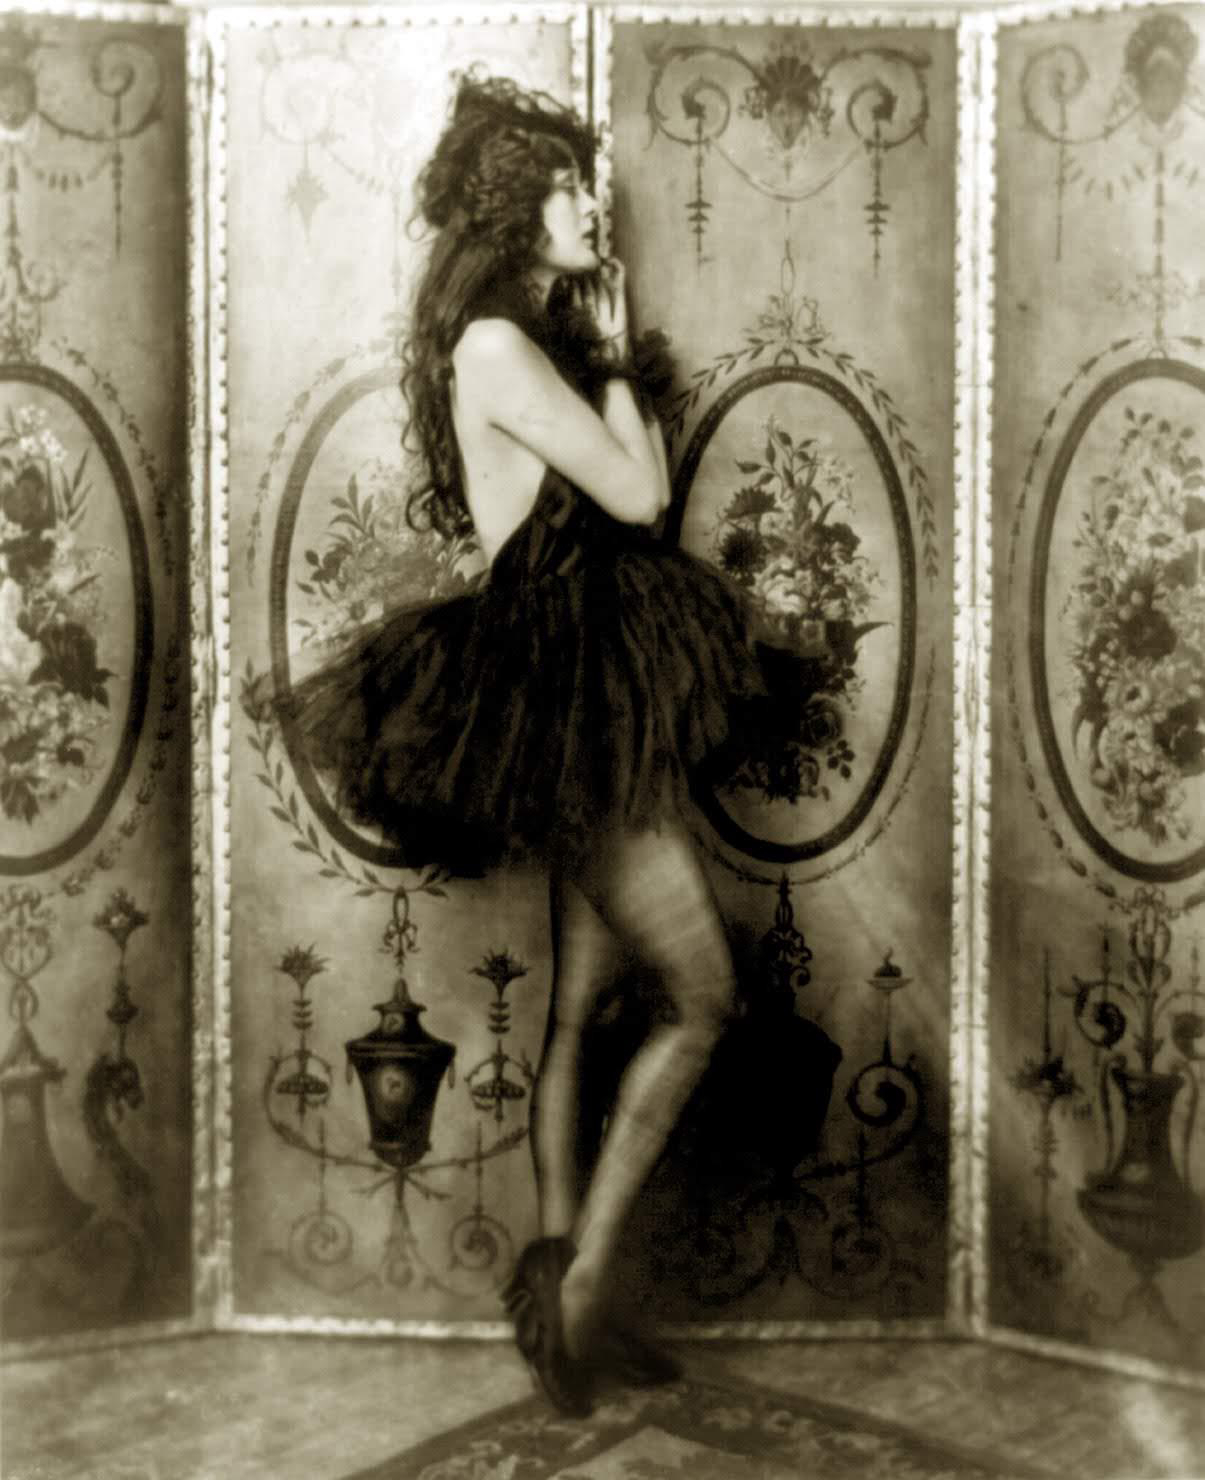 Vintage sepia-toned photograph of a pretty woman in a ruffled tutu and headdress, posing with one leg lifted, against a decorative folding screen.